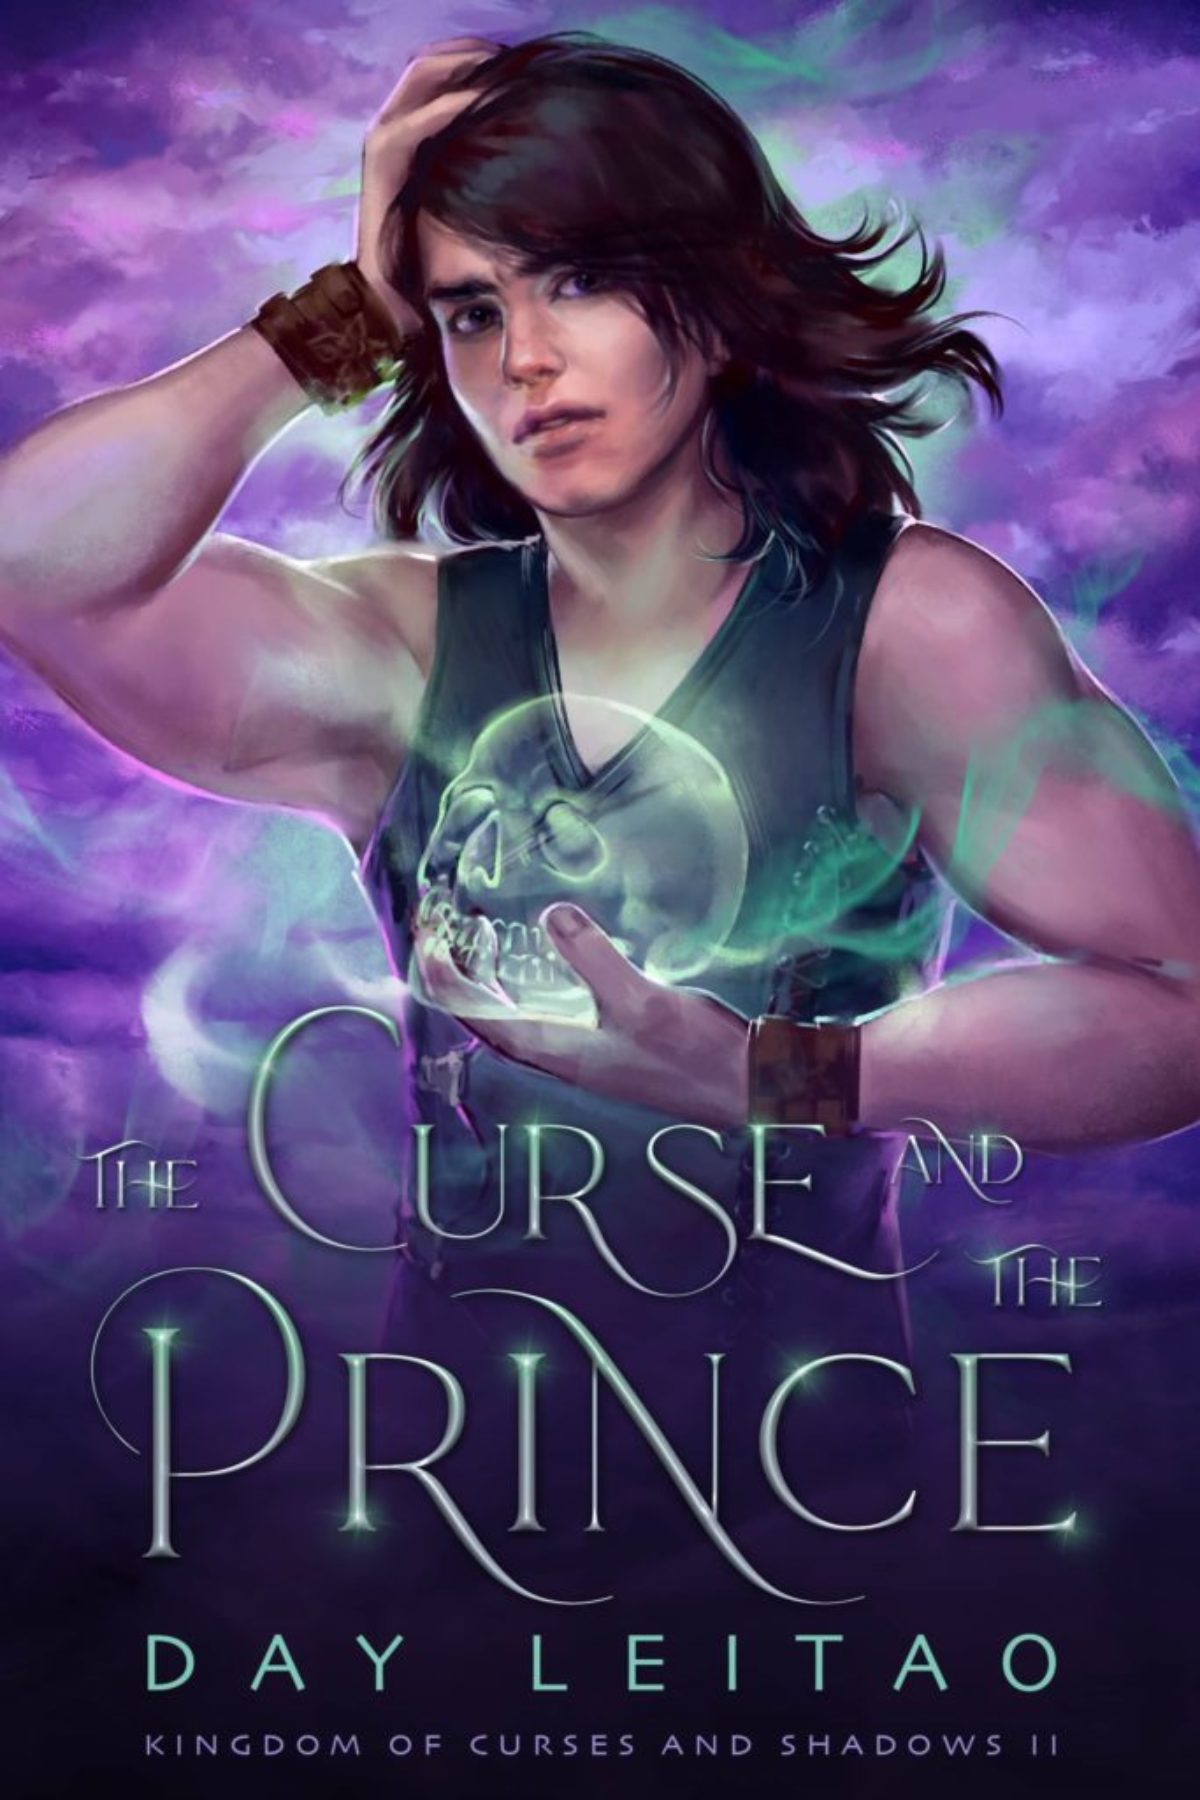 The Curse and the Prince